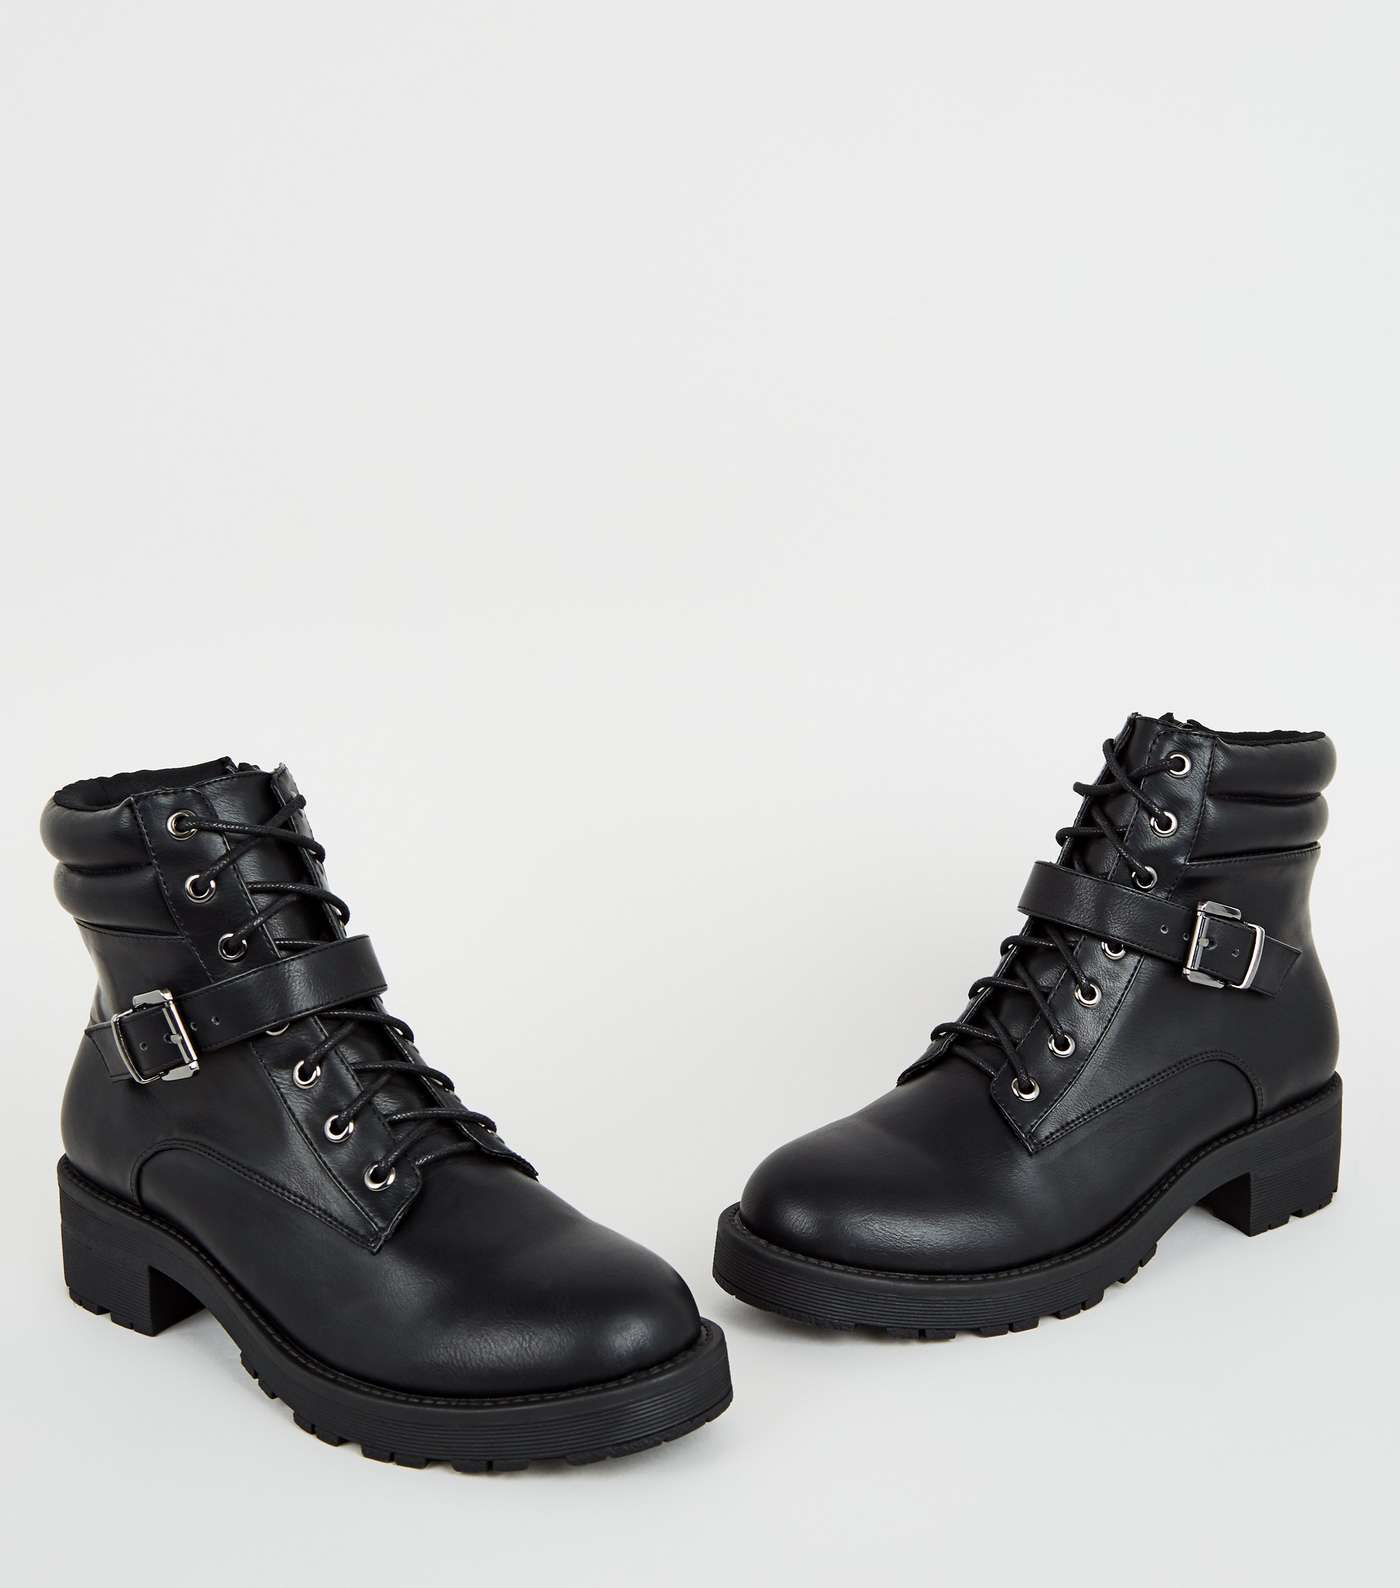 Black Leather-Look Lace Up Hiker Boots Image 3